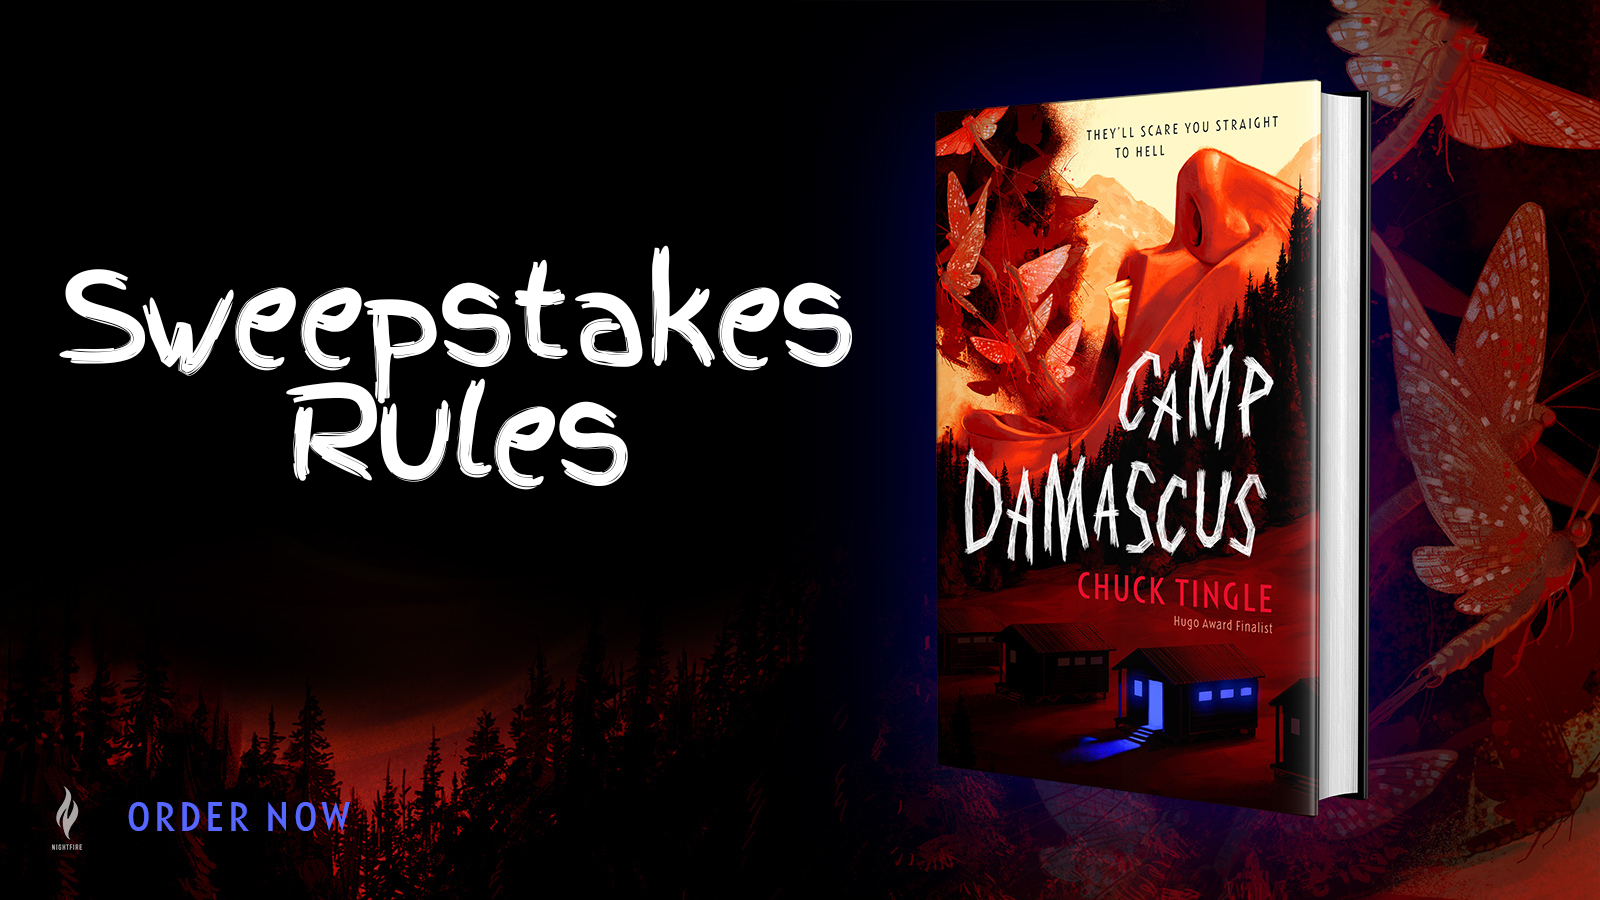 Camp Damascus Sweepstakes Rules - 908